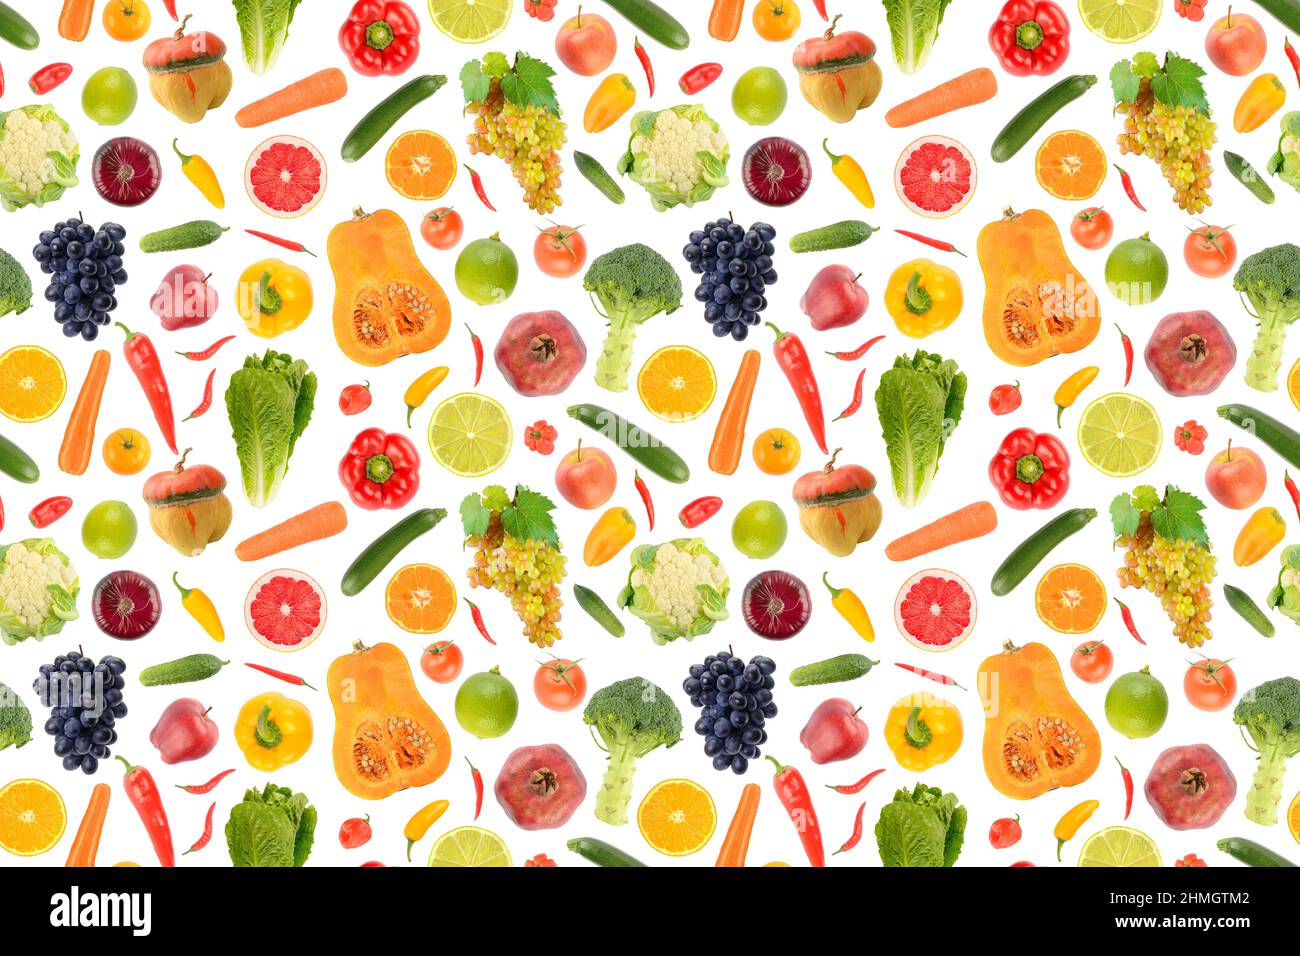 Seamless abstract pattern. Large collection of fresh vegetables and fruits isolated on white background. Stock Photo